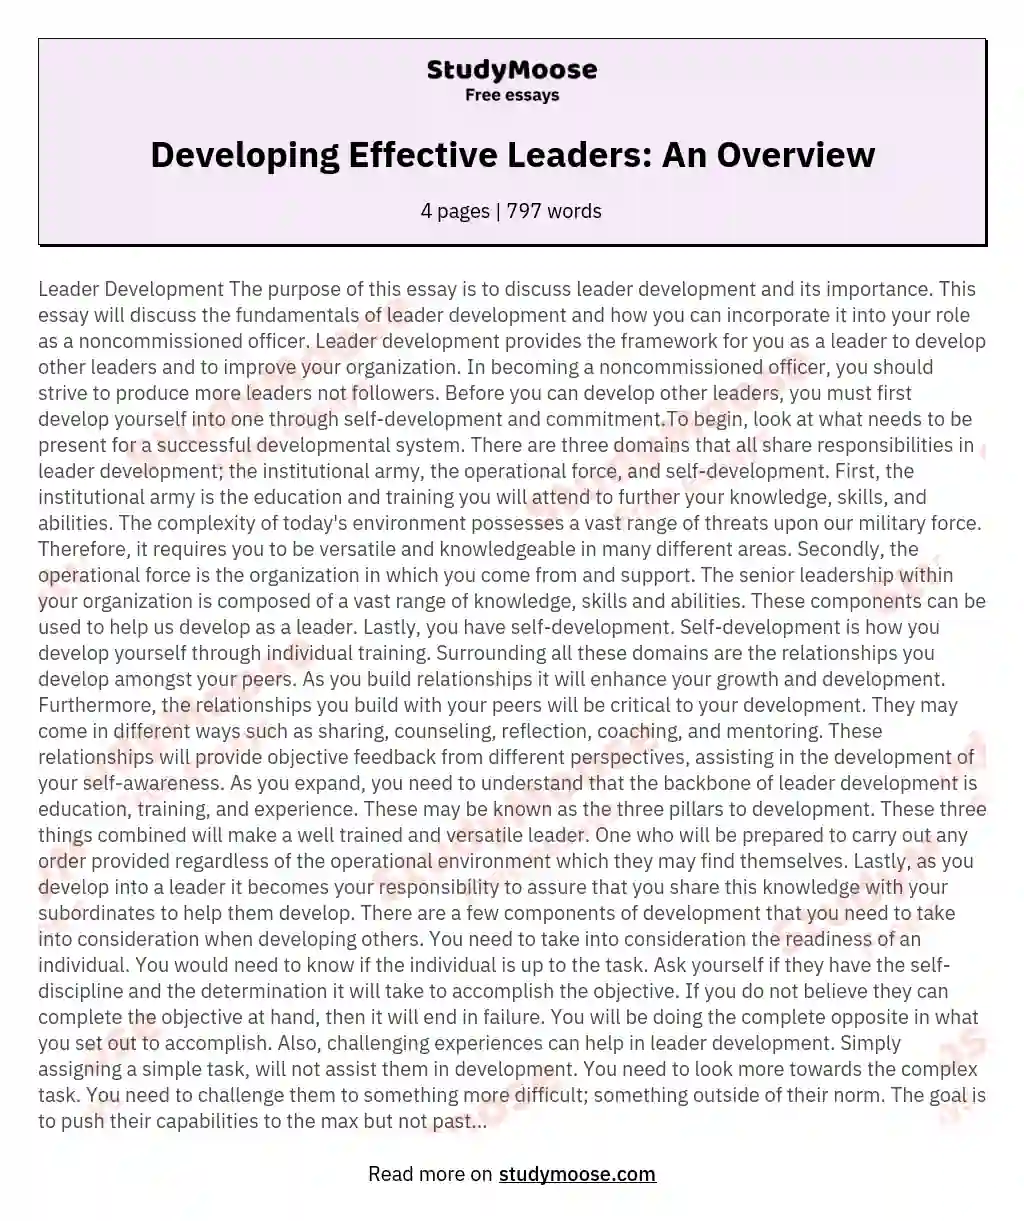 Developing Effective Leaders: An Overview